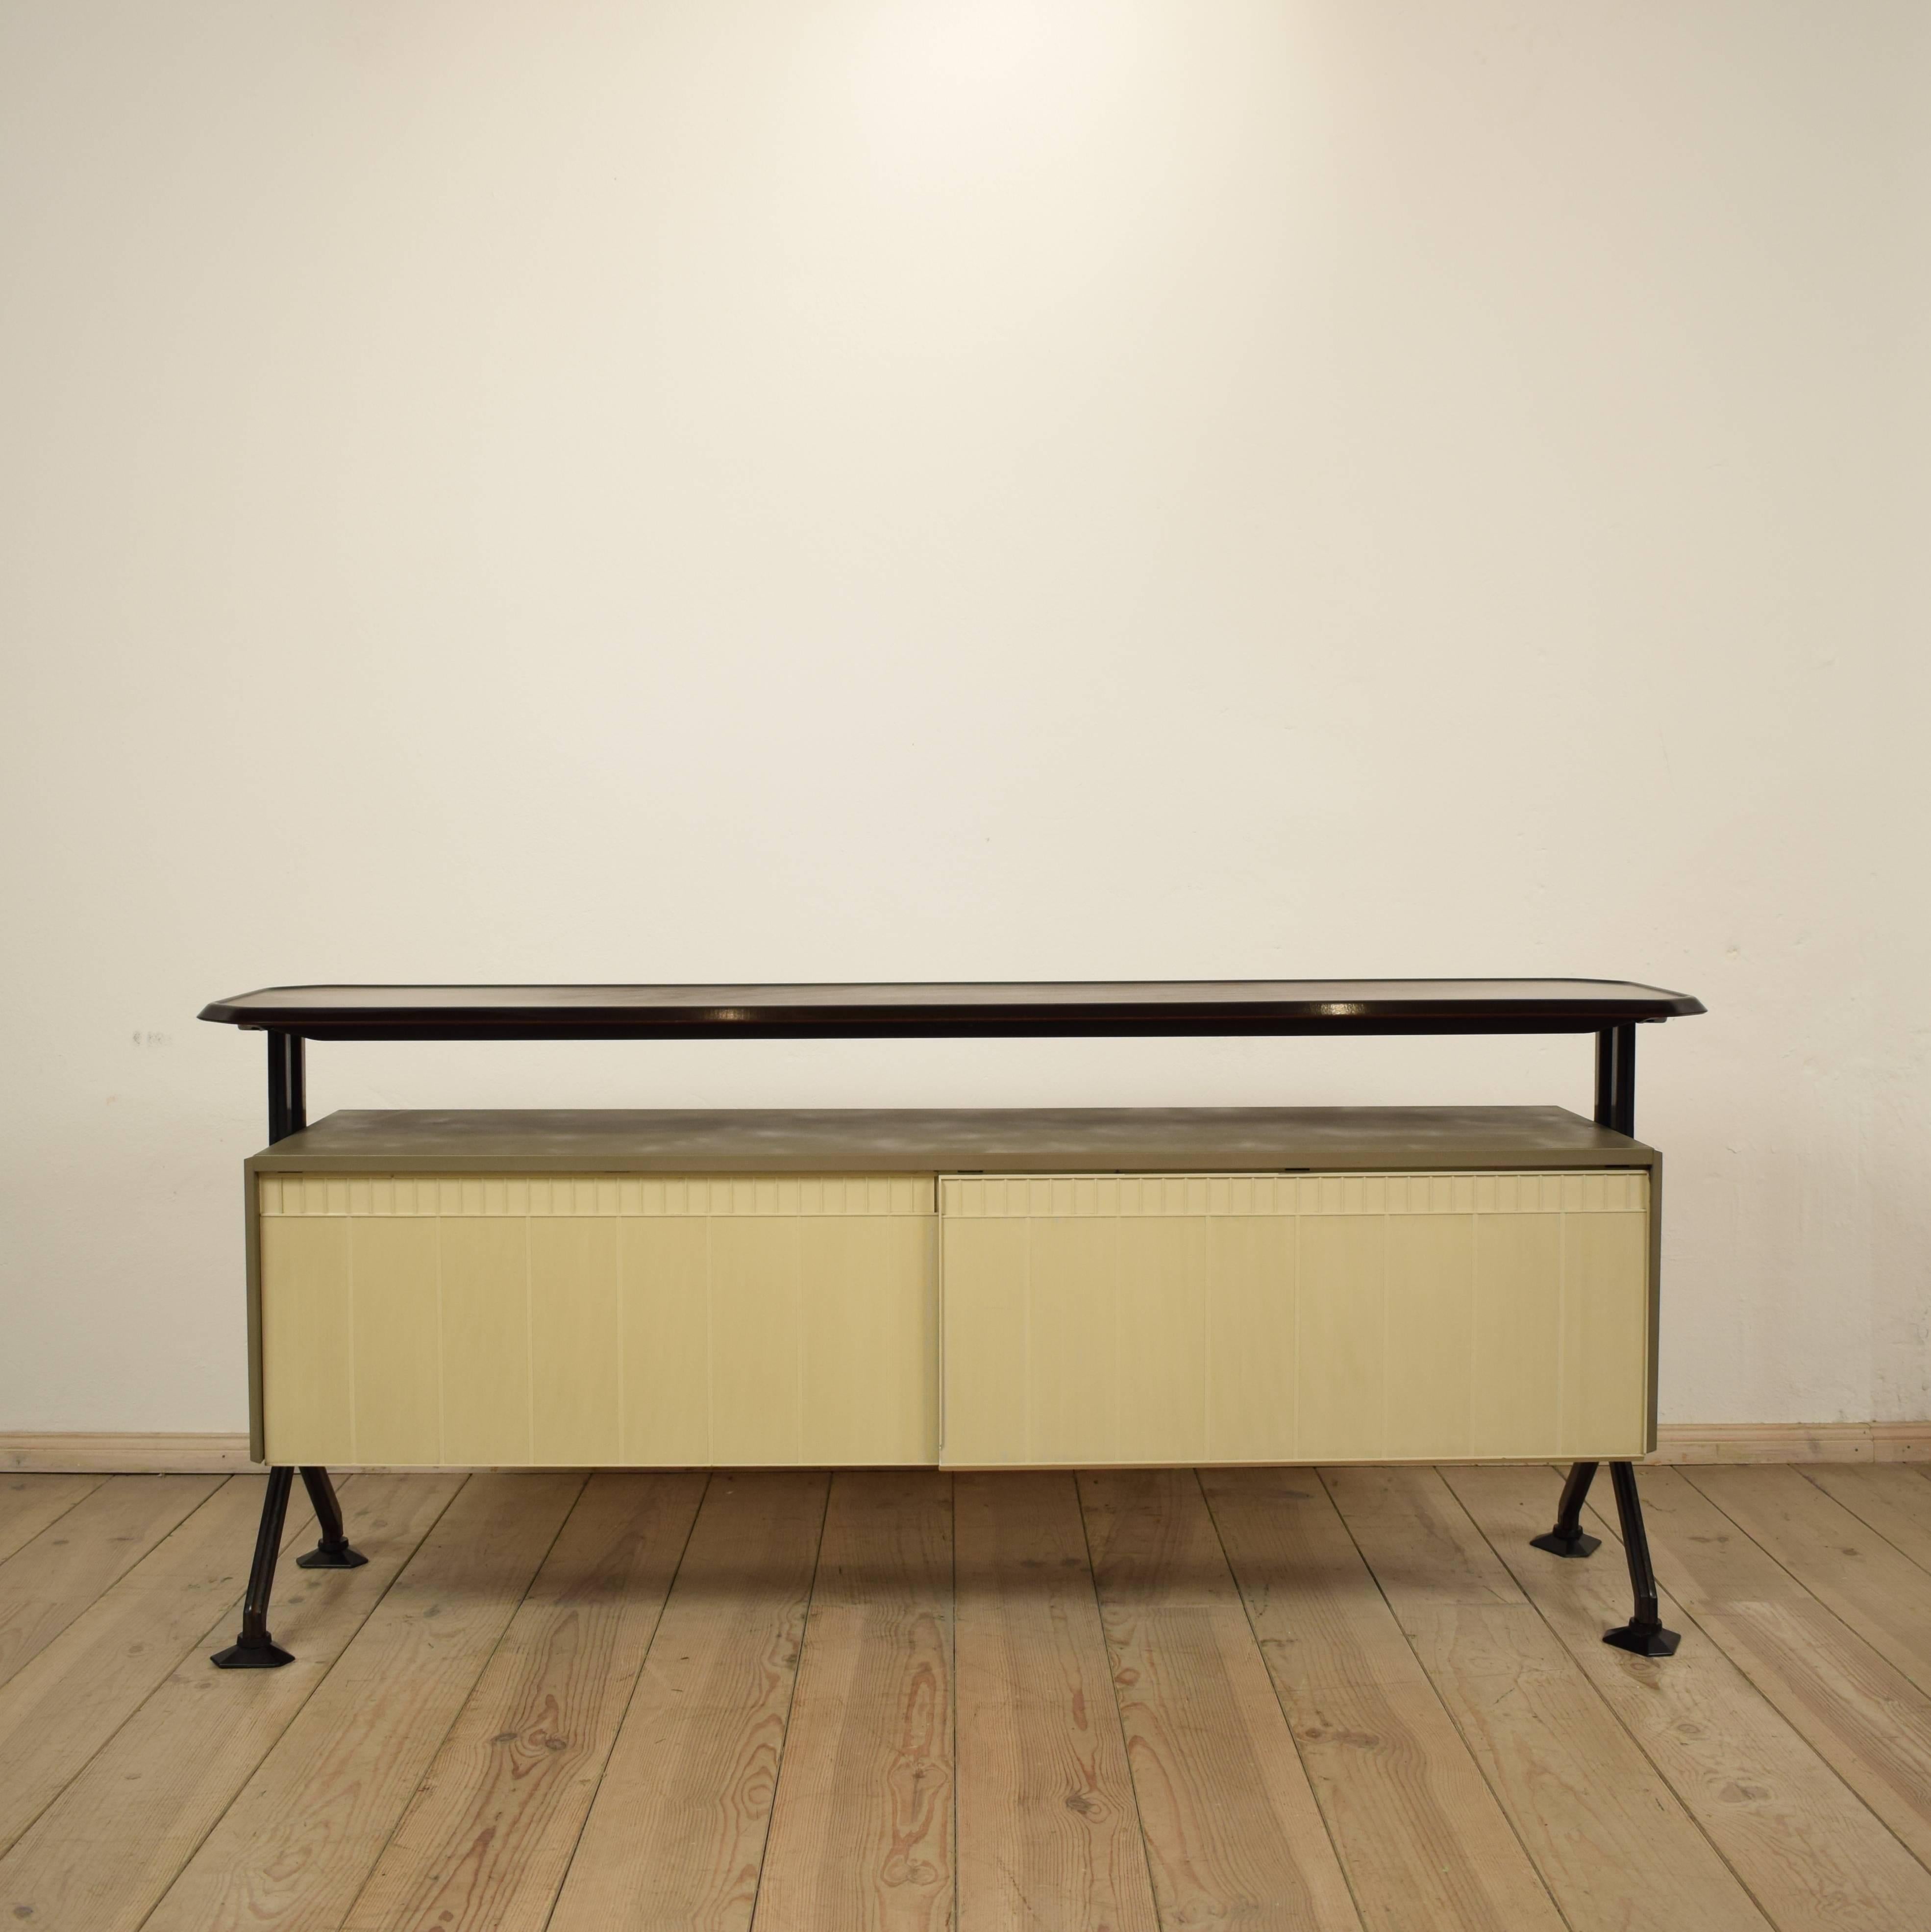 This vintage sideboard was designed in 1962 by BBPR. BBPR was an architectural partnership founded in Milan in 1932 and composed of Banfi, Belgiojoso, Peressutti and Rogers. Tragically Banfi died in a concentration camp during the second world war,